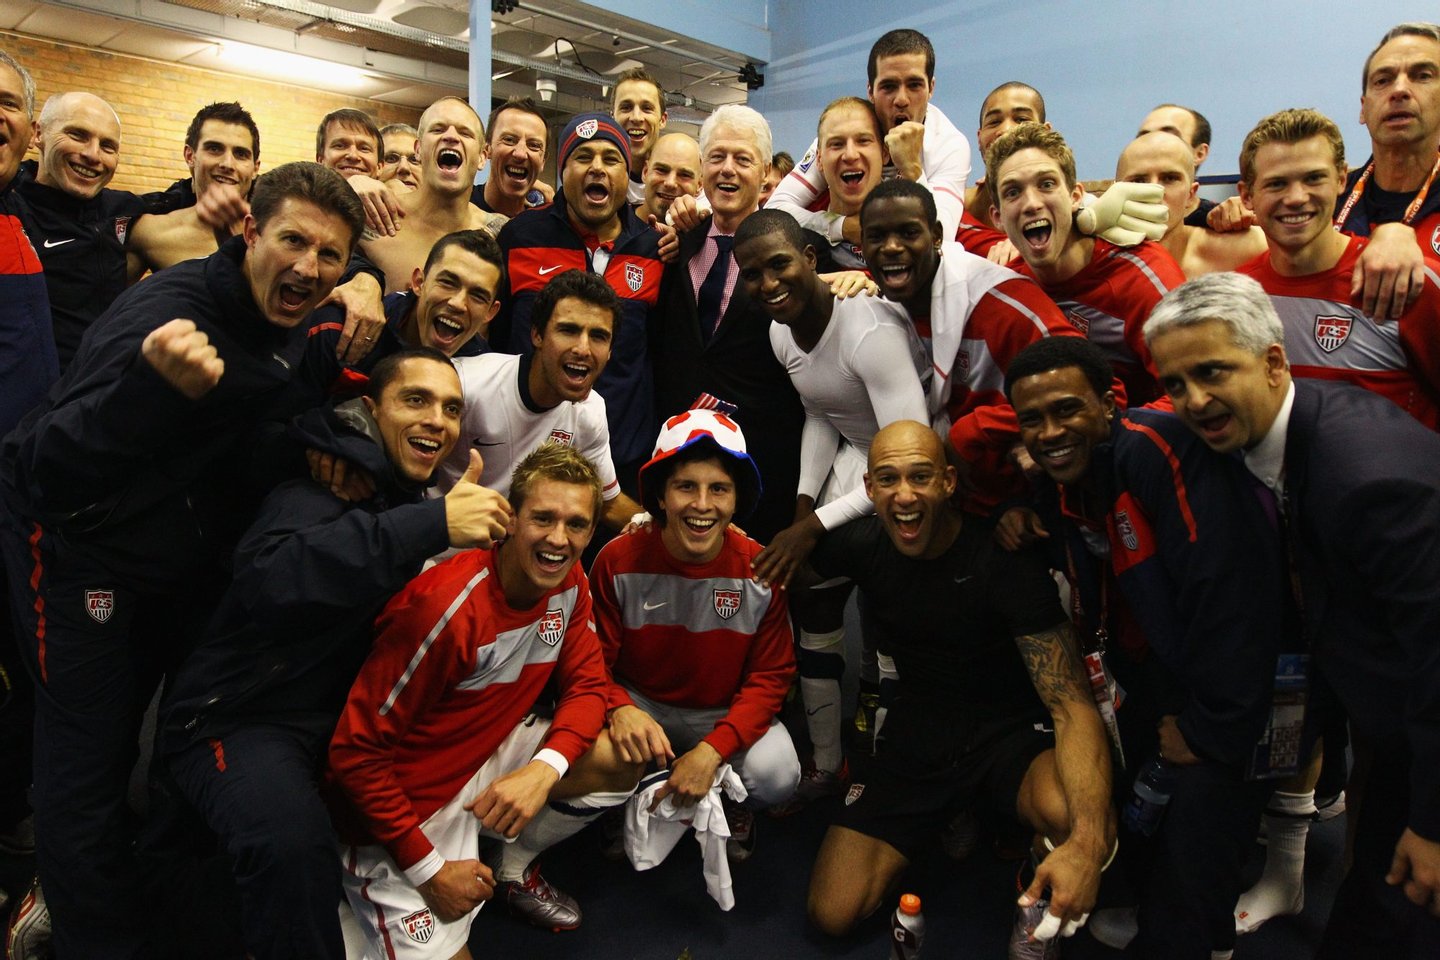 PRETORIA, SOUTH AFRICA - JUNE 23: Former US President Bill Clinton poses with jubilant US players in their dressing room after the 2010 FIFA World Cup South Africa Group C match between USA and Algeria at the Loftus Versfeld Stadium on June 23, 2010 in Tshwane/Pretoria, South Africa. (Photo by Jeff Mitchell - FIFA/FIFA via Getty Images)